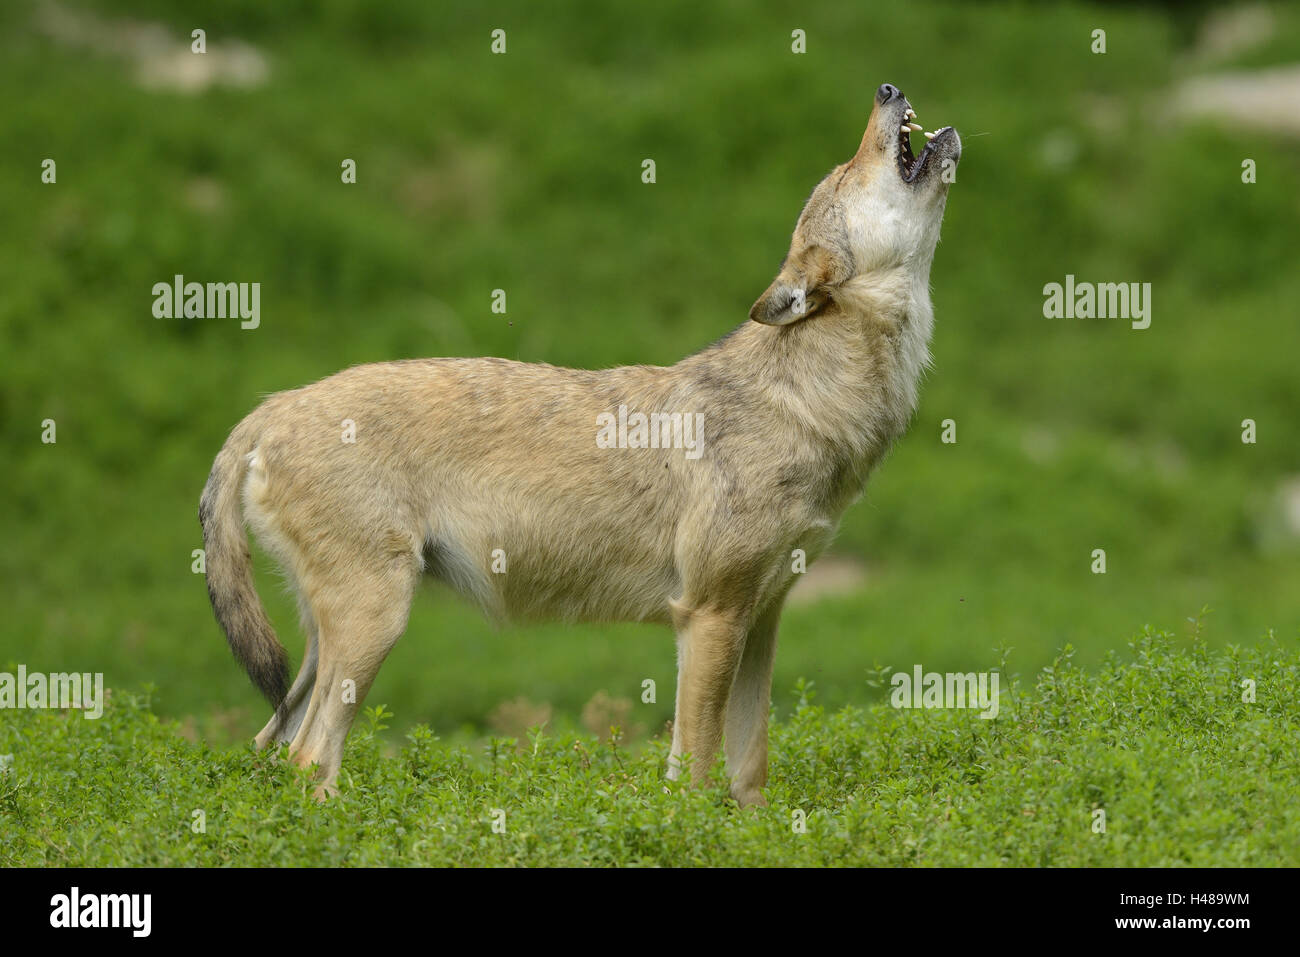 Eastern Timber Wolf, Canis lupus lycaon, meadow, debout, hurlements, vue latérale, Banque D'Images